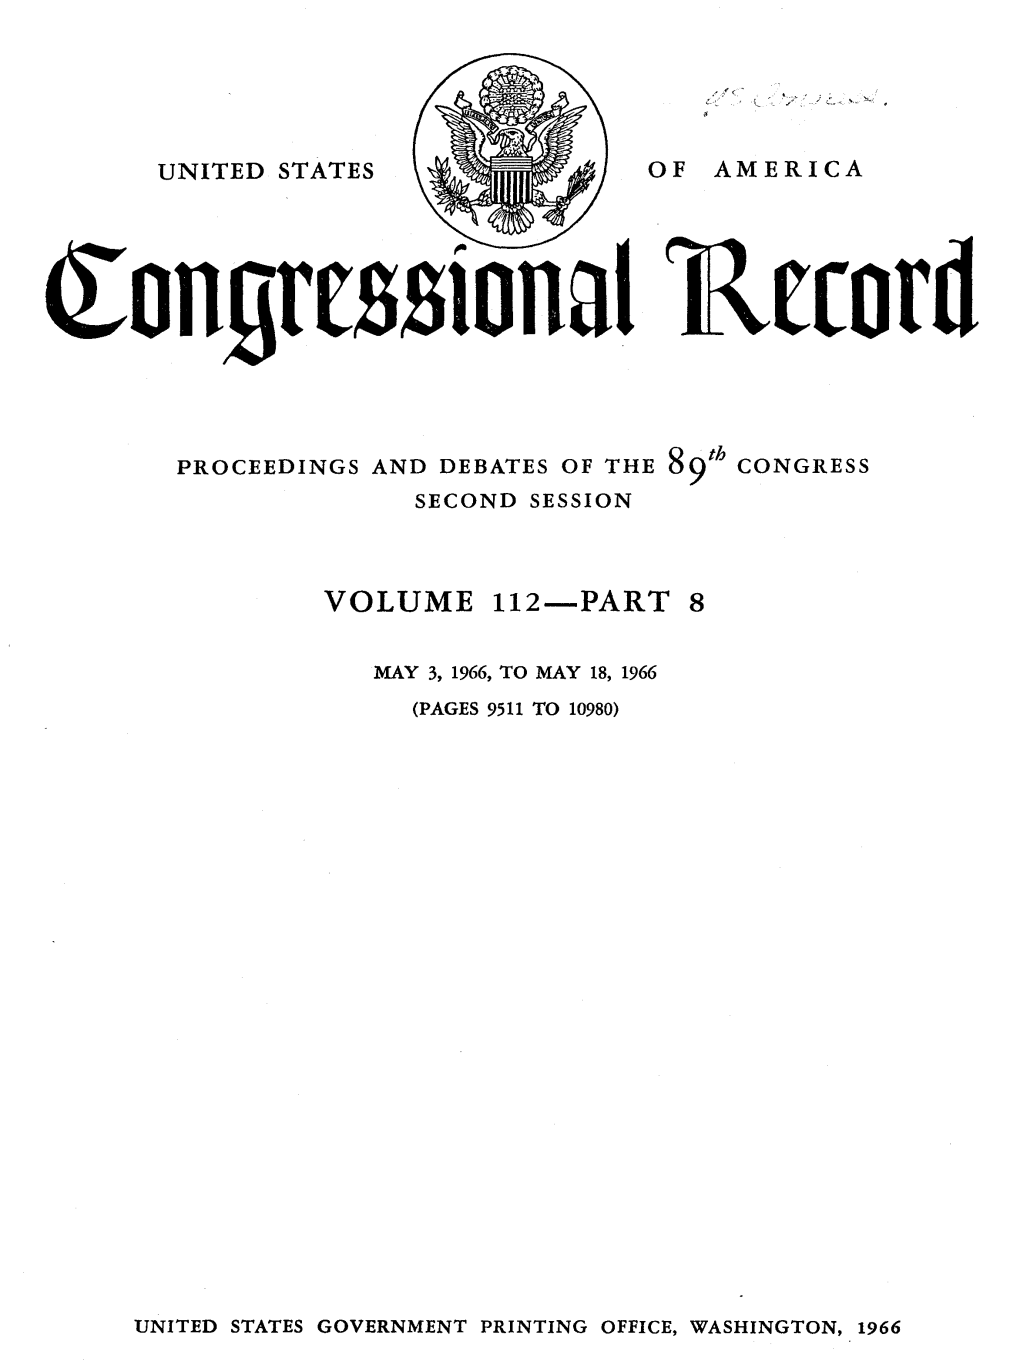 89Th Cong., 2Nd Sess., Congressional Record